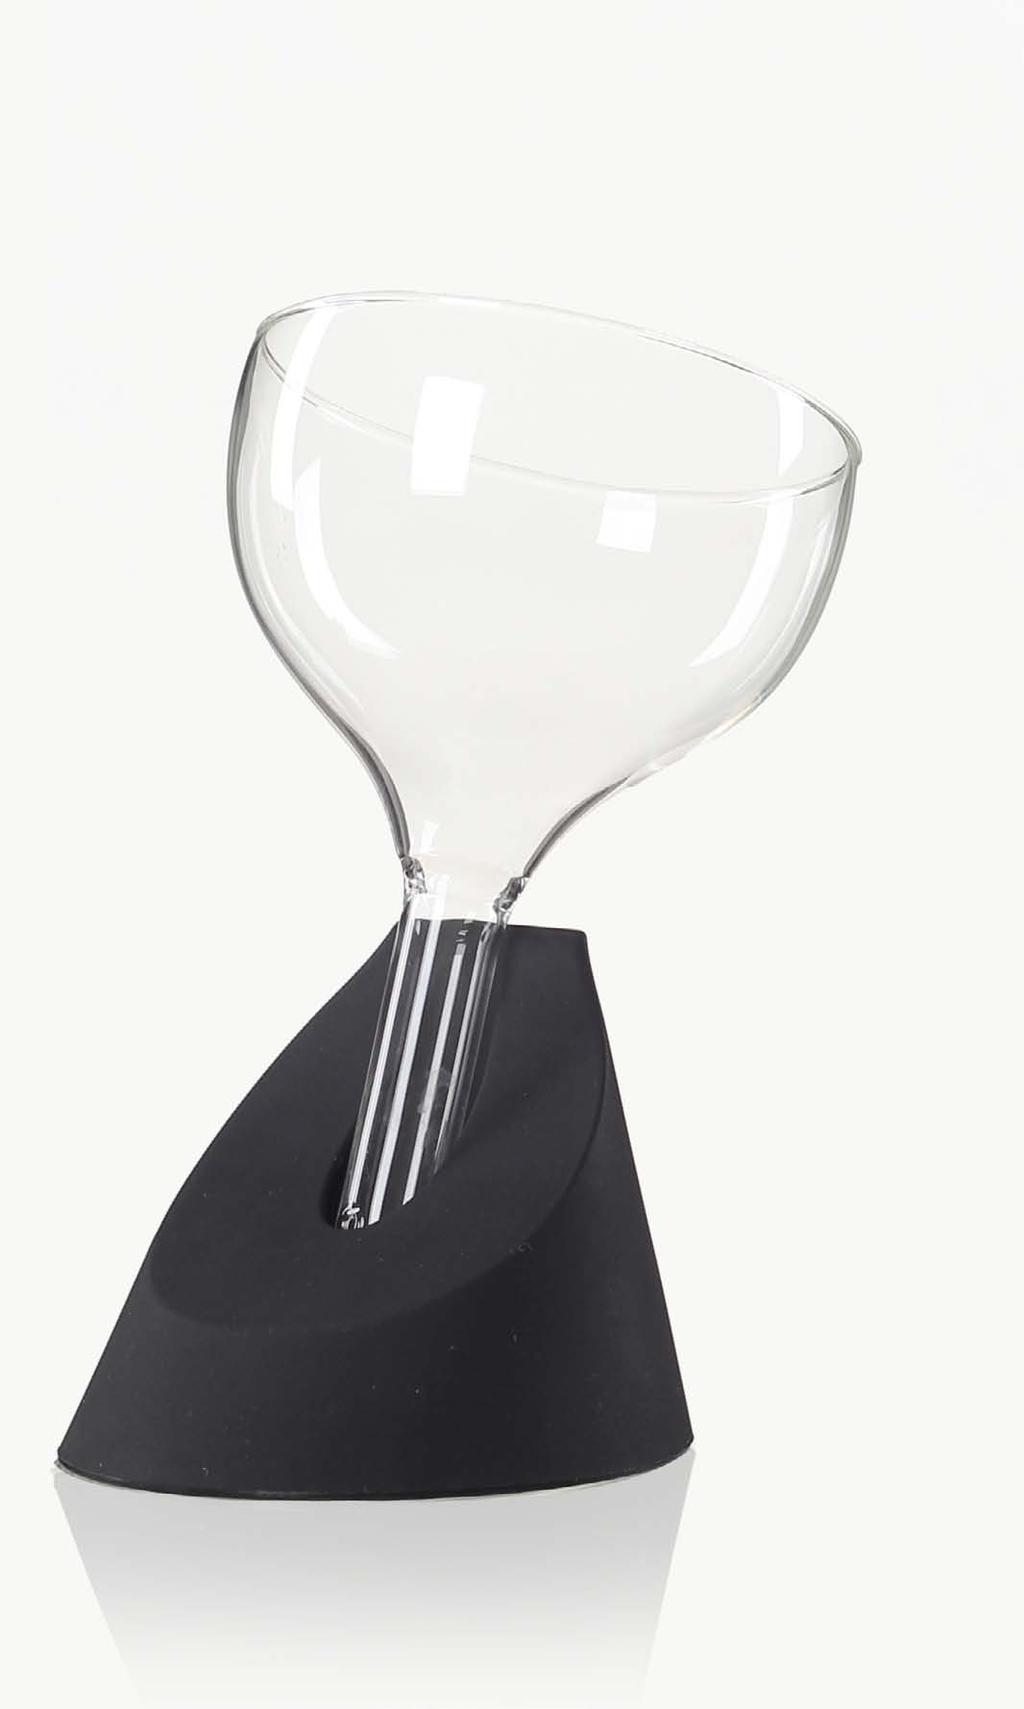 The decanter s unique funnel top helps aerate wine so it is ready to drink sooner, and pours